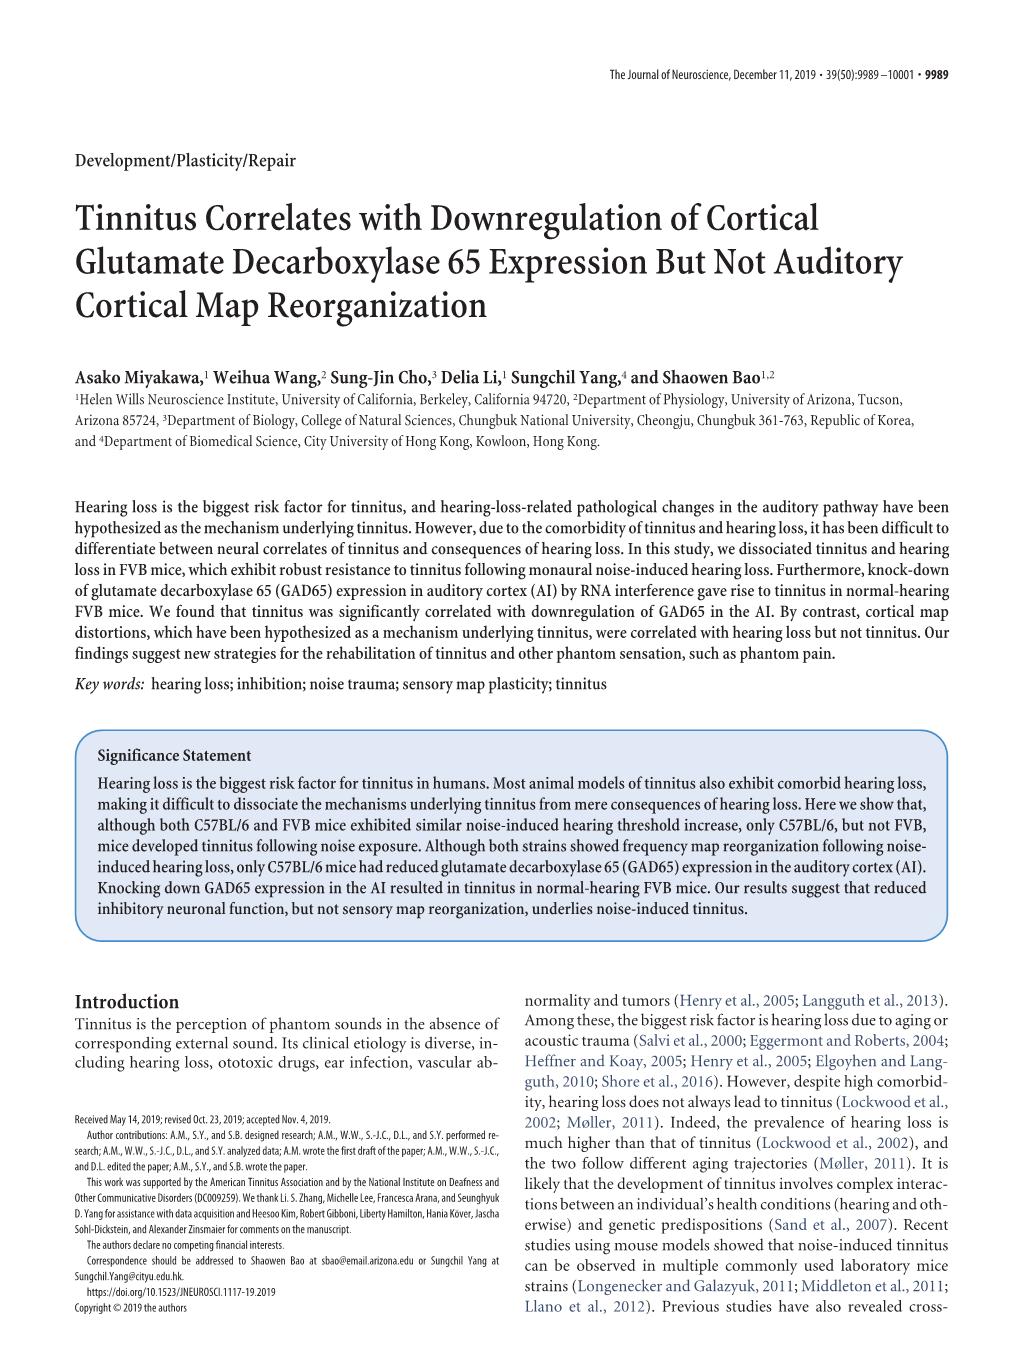 Tinnitus Correlates with Downregulation of Cortical Glutamate Decarboxylase 65 Expression but Not Auditory Cortical Map Reorganization